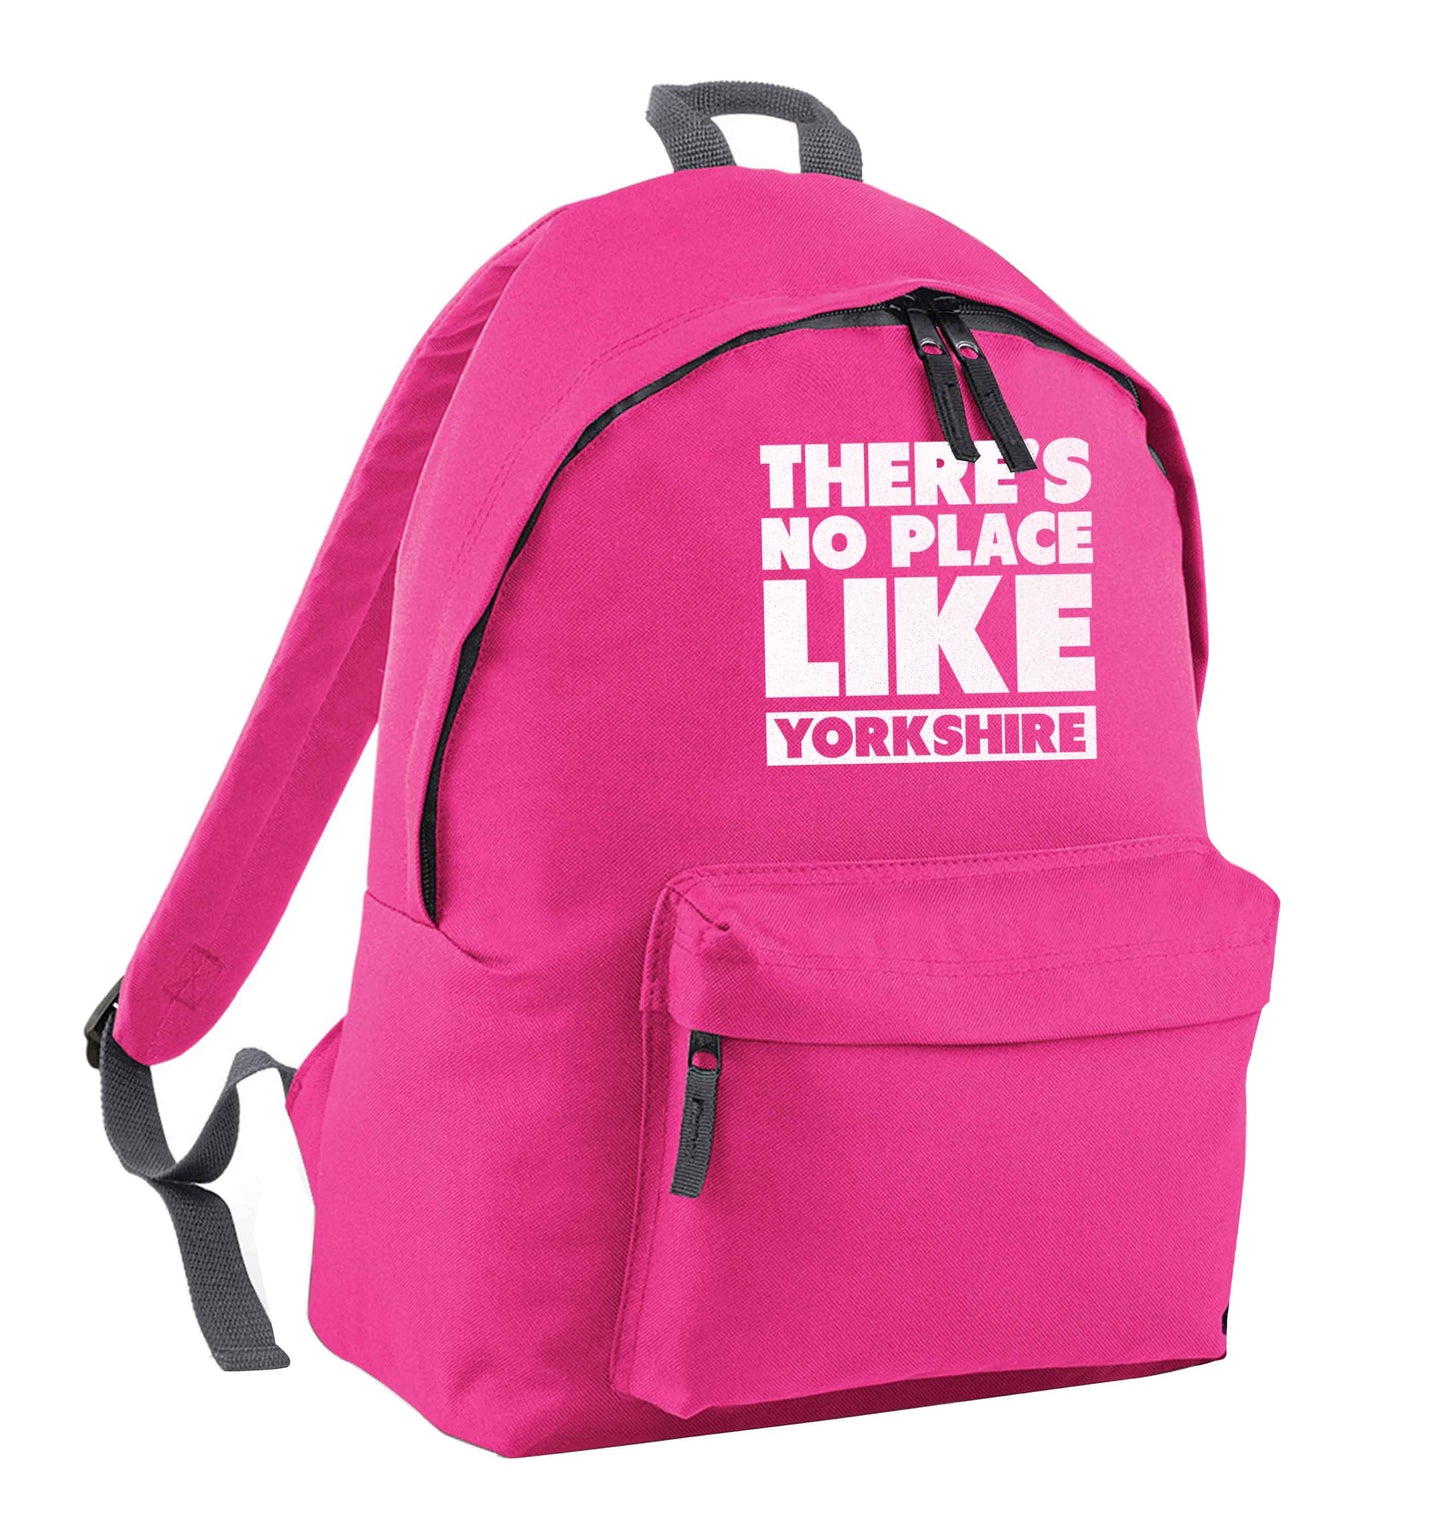 There's no place like Yorkshire pink children's backpack